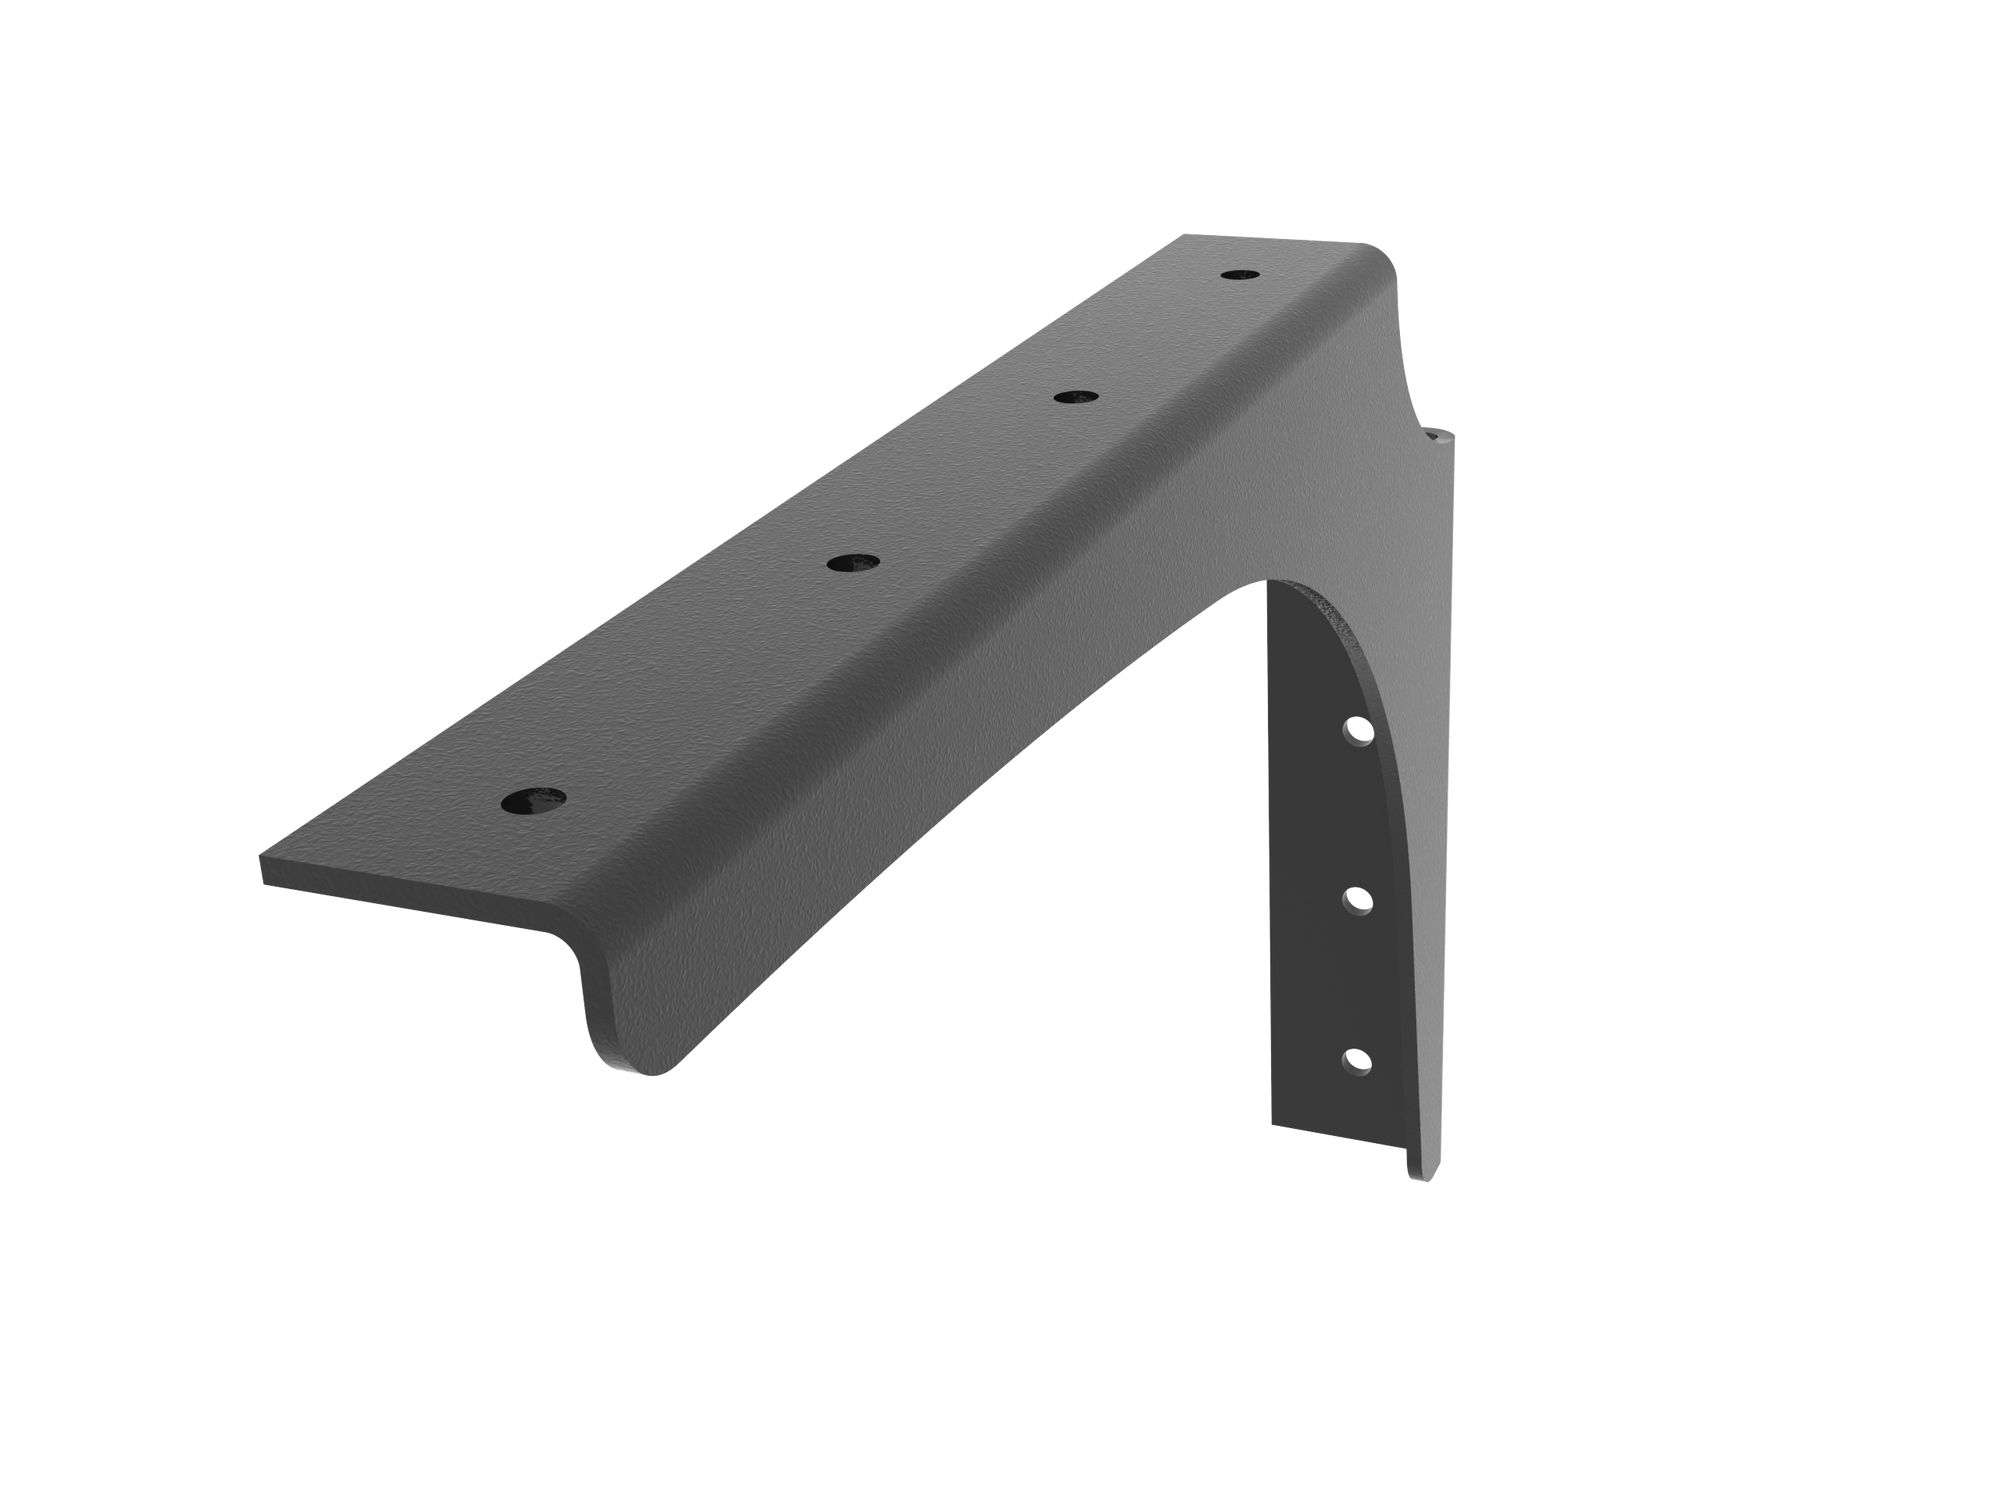 Universal Commercial Support Bracket - 12" x 8" Right with Black Powder Coat Finish. Supports floating ADA-compliant vanities, desks, shelving, countertops, and more.